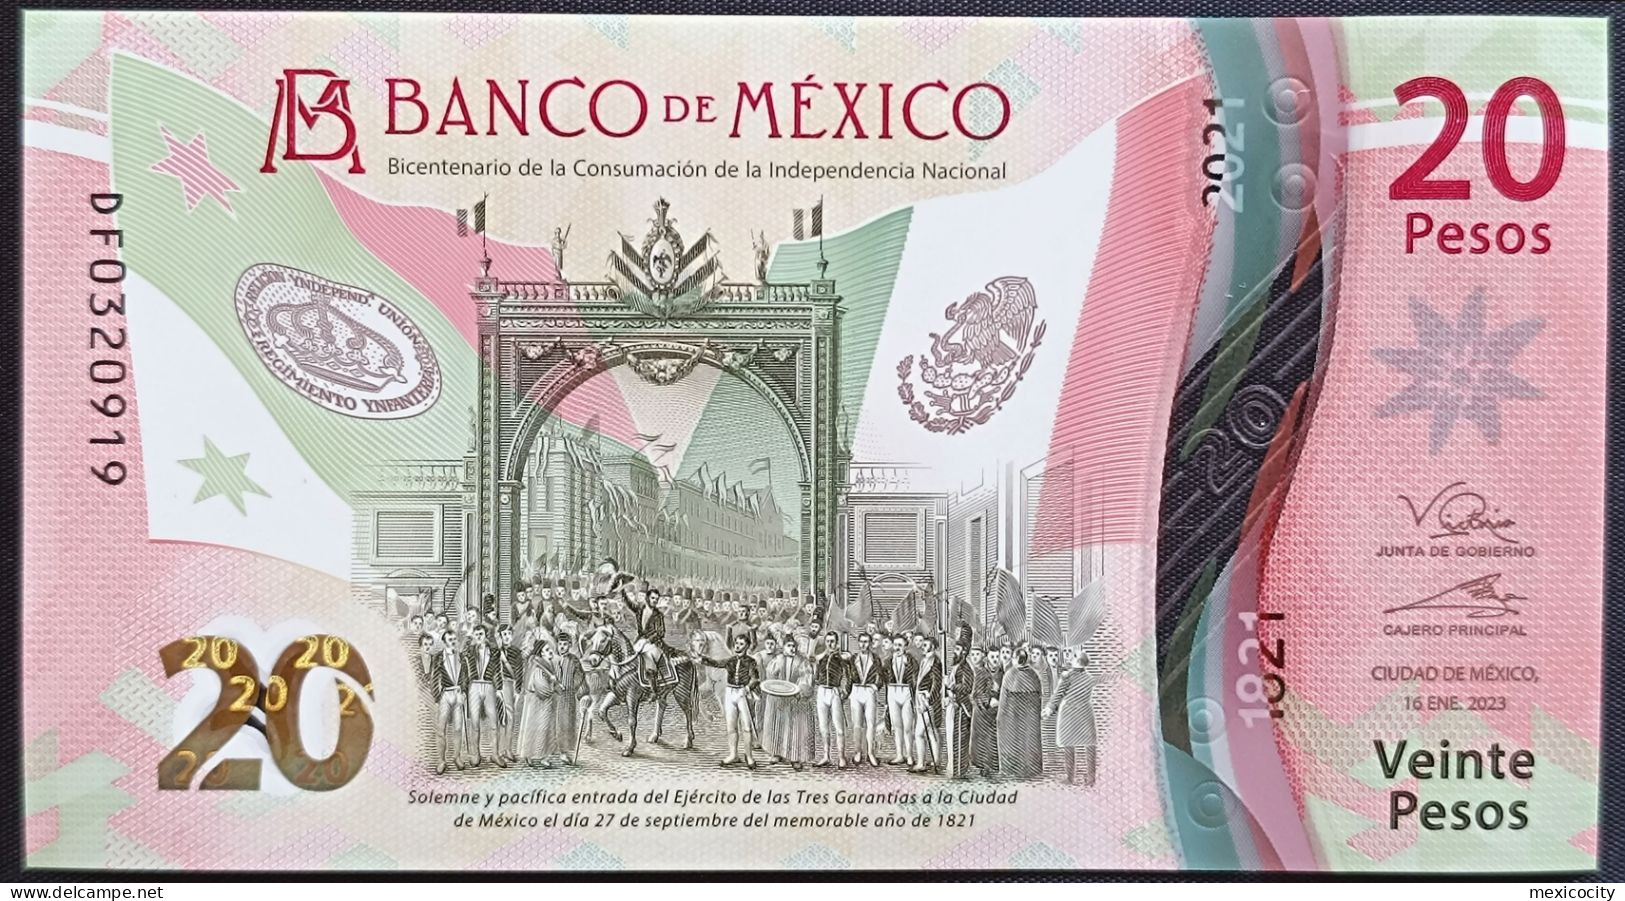 MEXICO $20 ! SERIES DF NEW 16-JAN-2023 DATE ! Victoria Rod. Sign. INDEPENDENCE POLYMER NOTE Read Descr. For Notes - Mexico